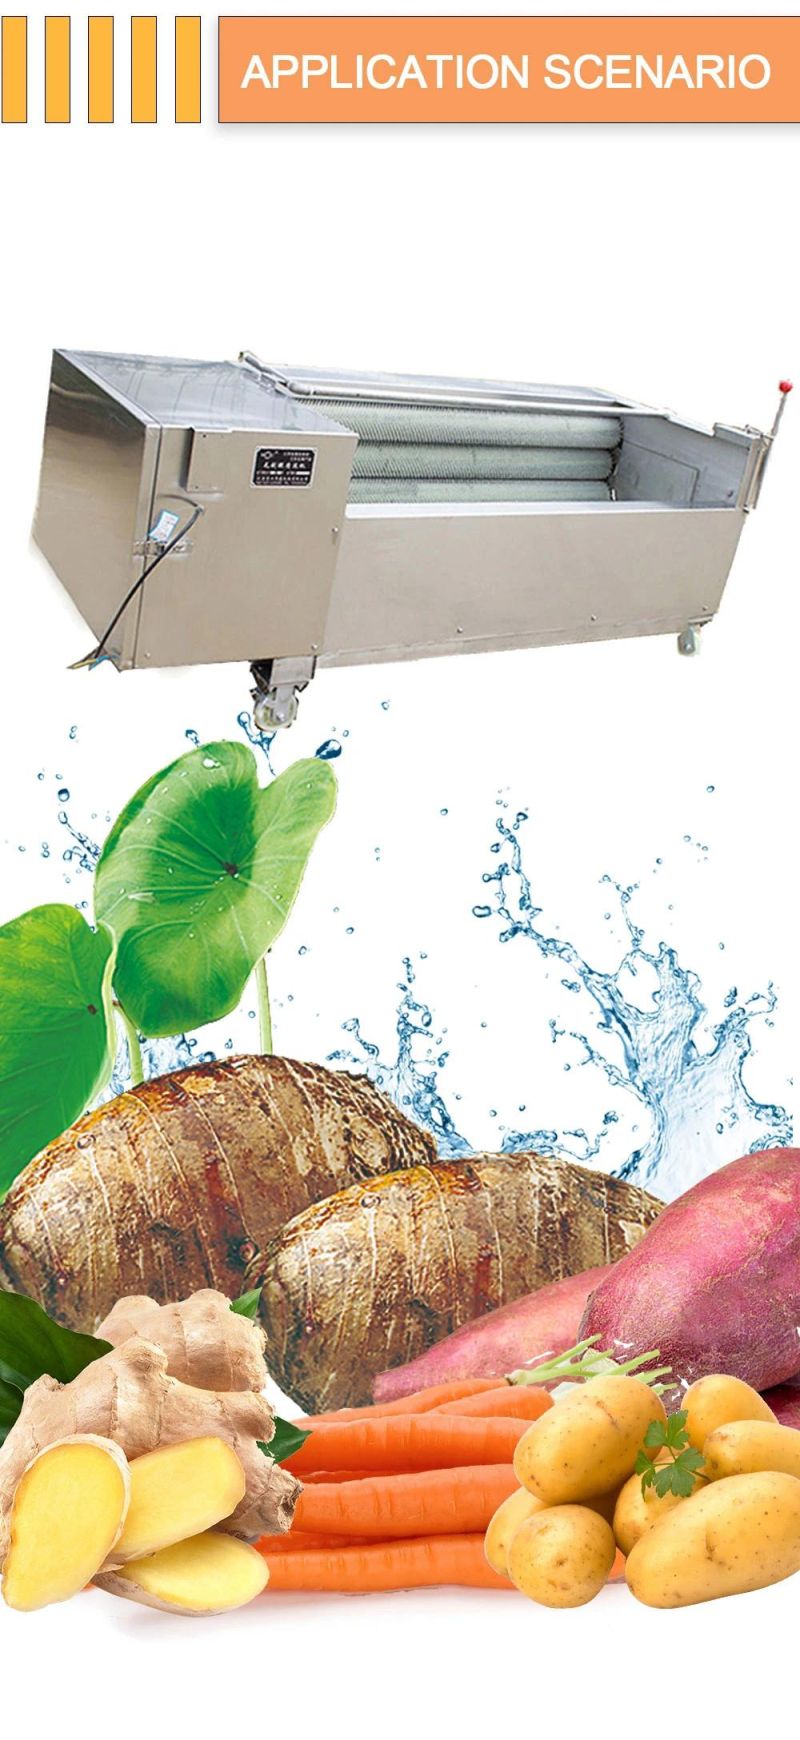 Commercial Washing Machine Potato Carrot Peeling Machine Roots Vegetable Cleaning Machine